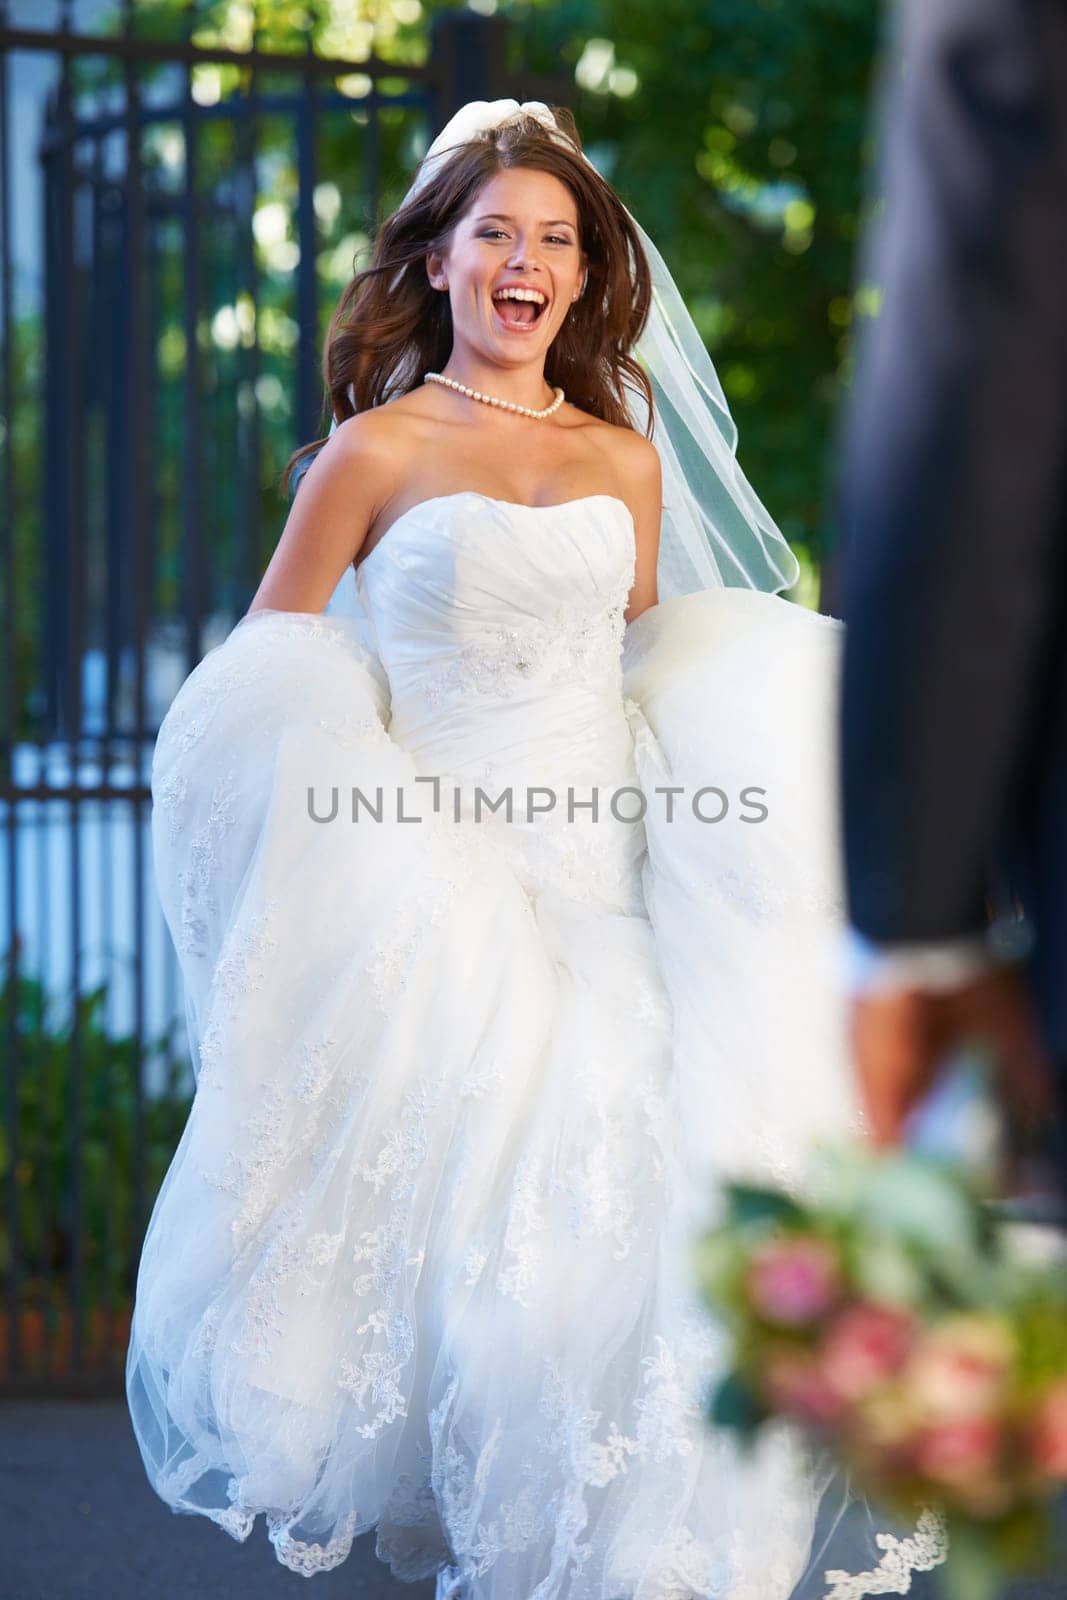 Excited, bride with smile and running outside to groom with flowers, love and marriage celebration. Happiness, commitment and woman in wedding dress with partner, bouquet and romance at reception